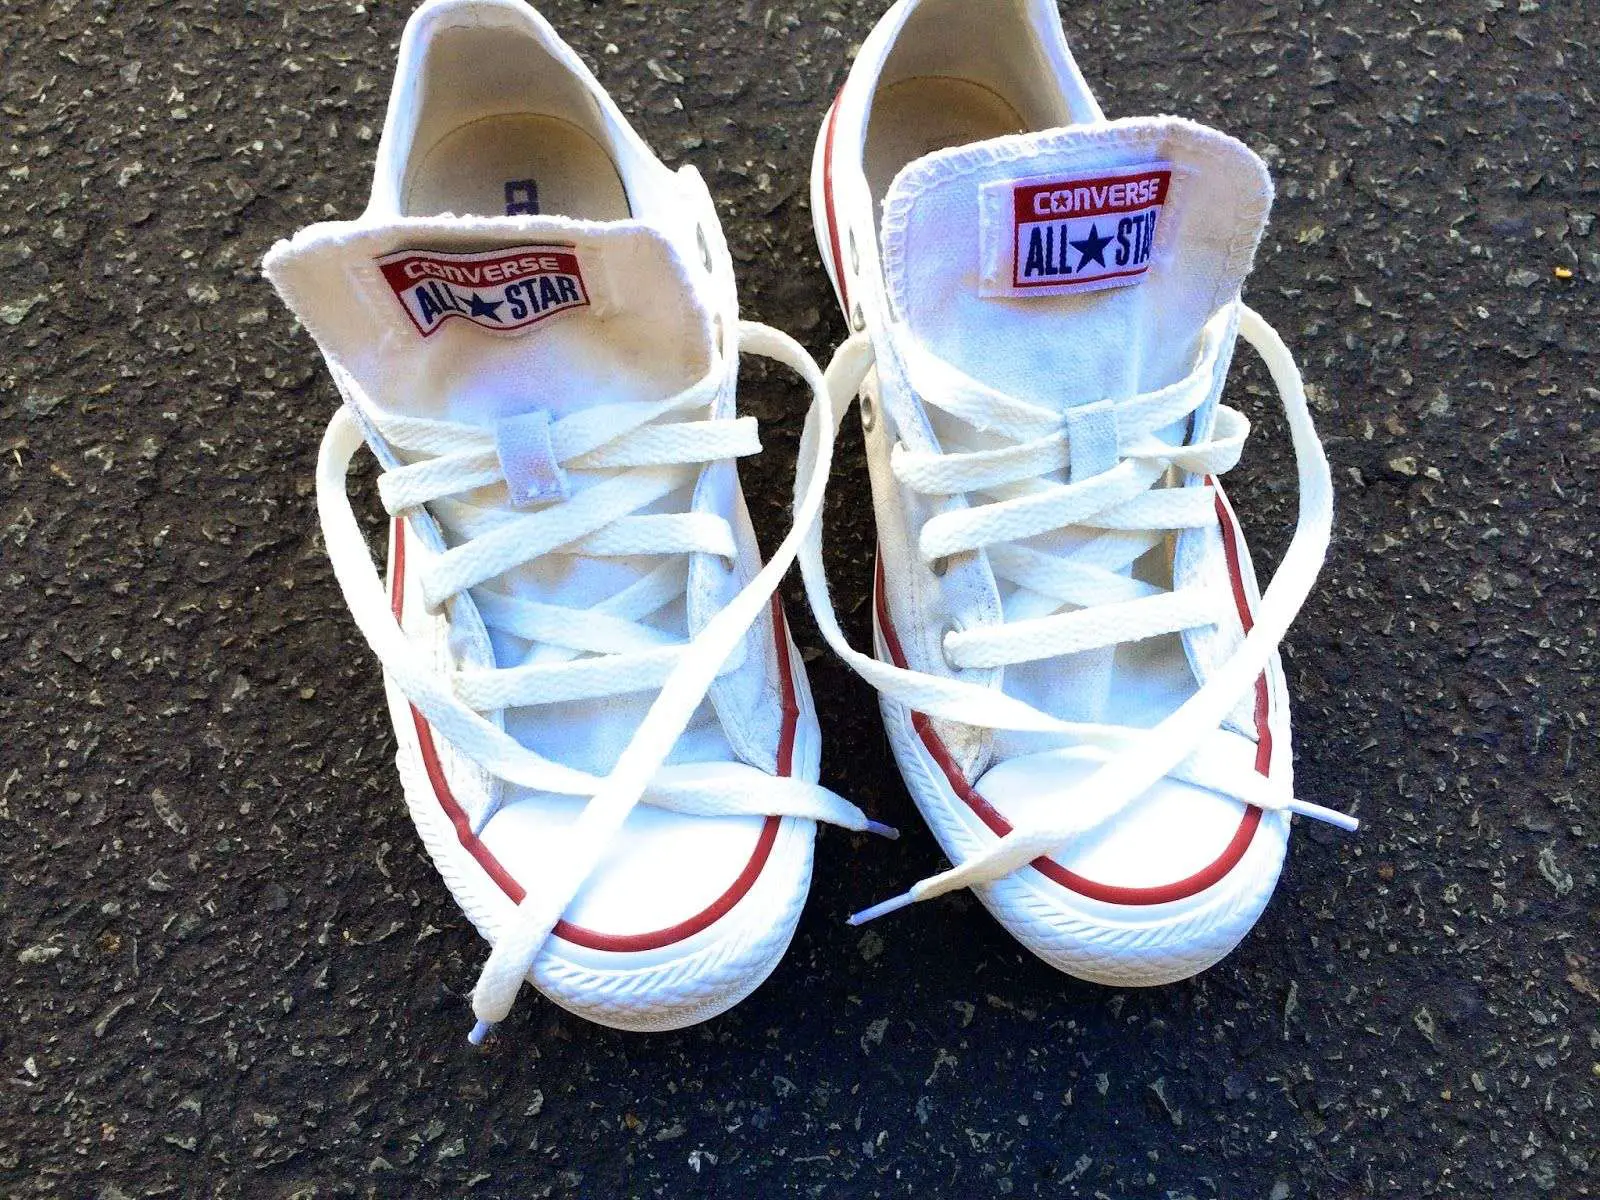 How to make your dirty white shoes super duper white again!